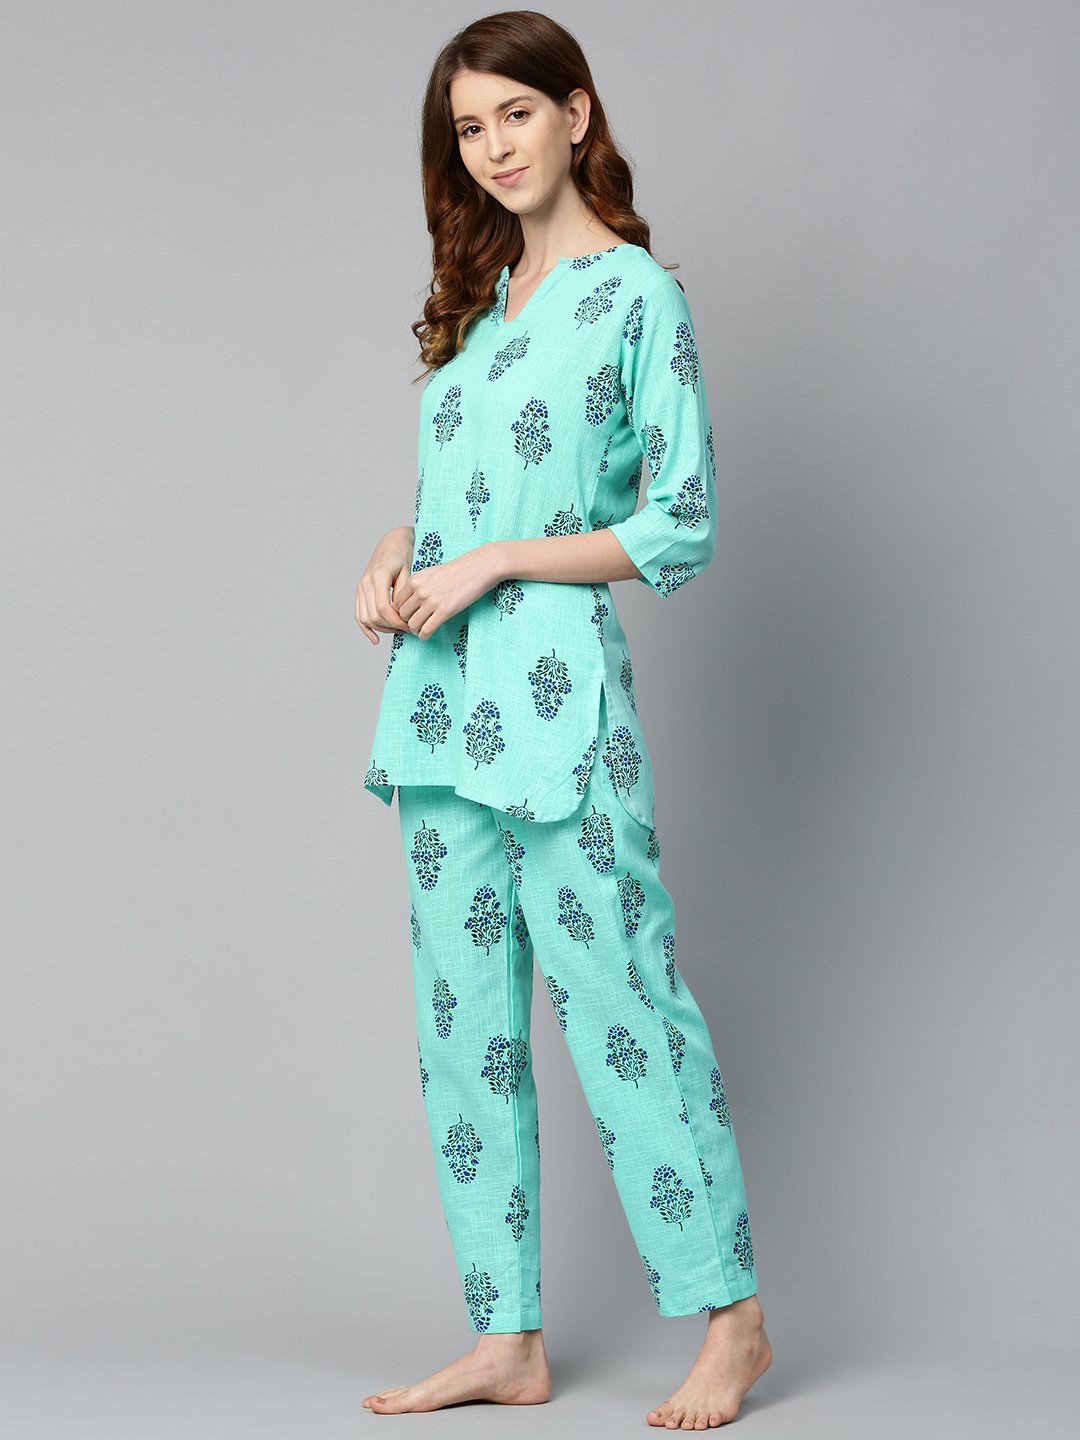 Women's Turq Green And Multi Floral Prnt Top And Pant Set - Nayo Clothing